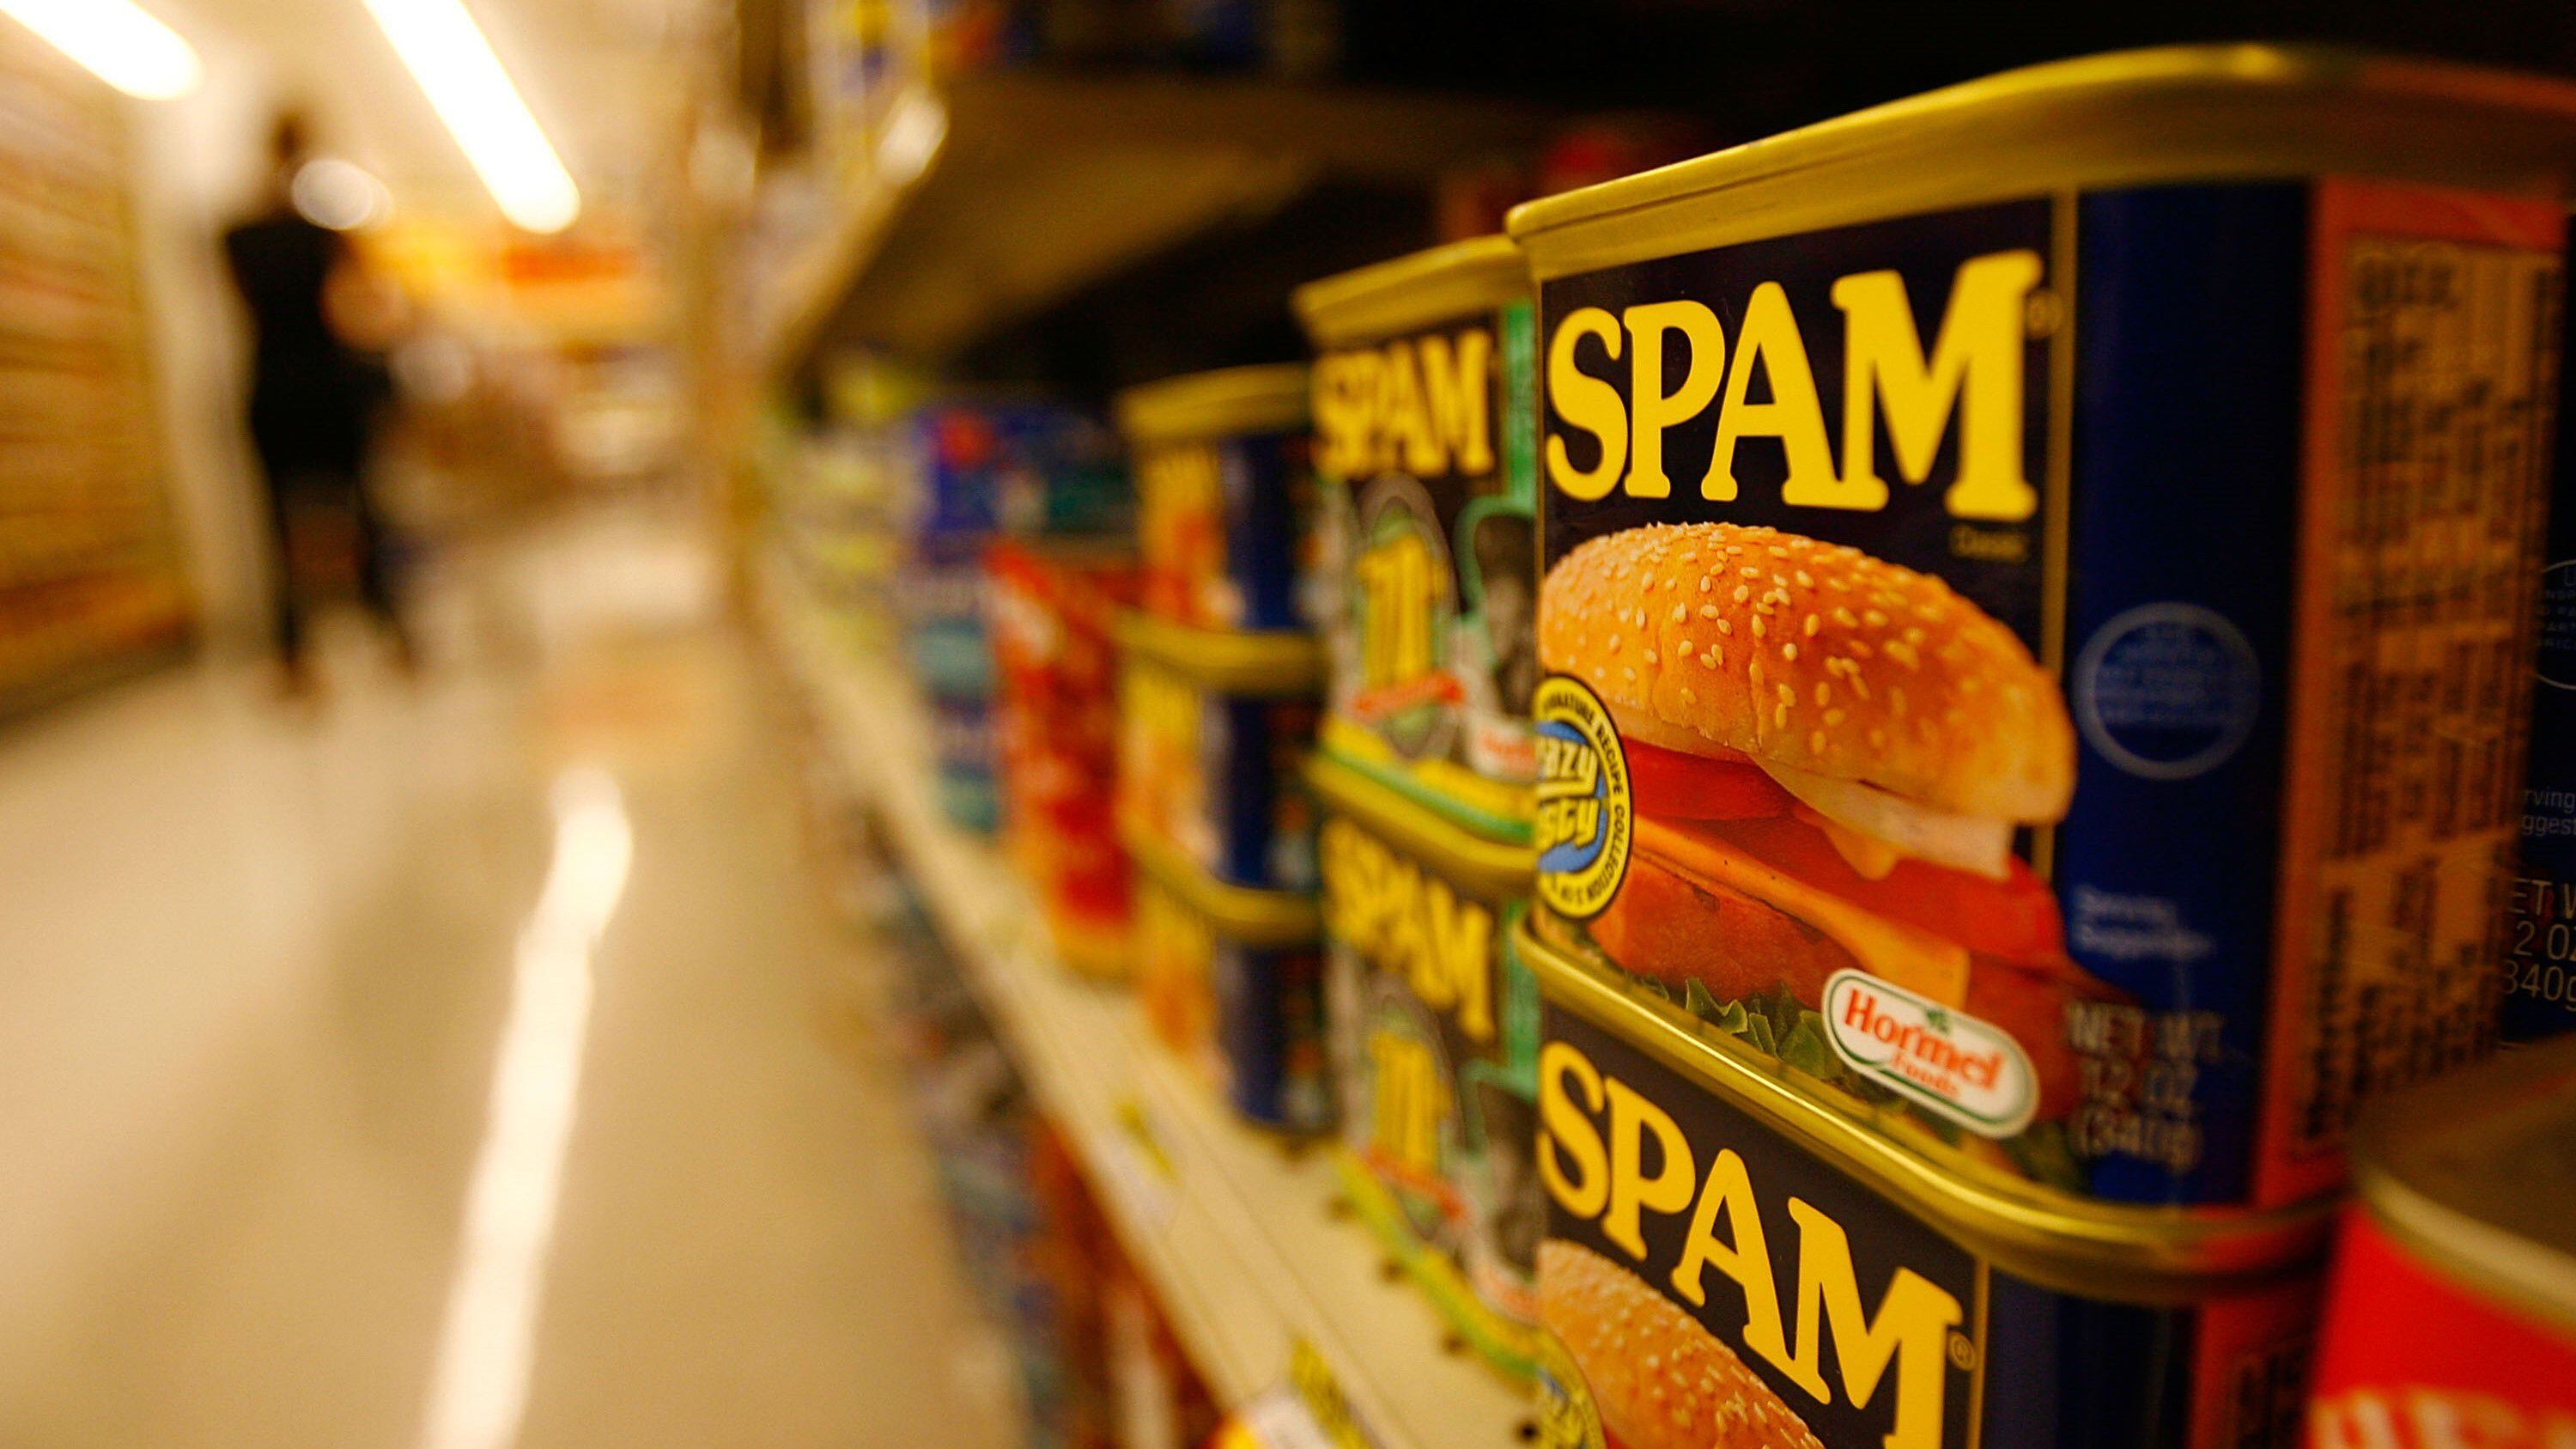 New Flavors of Spam Hit the Shelves